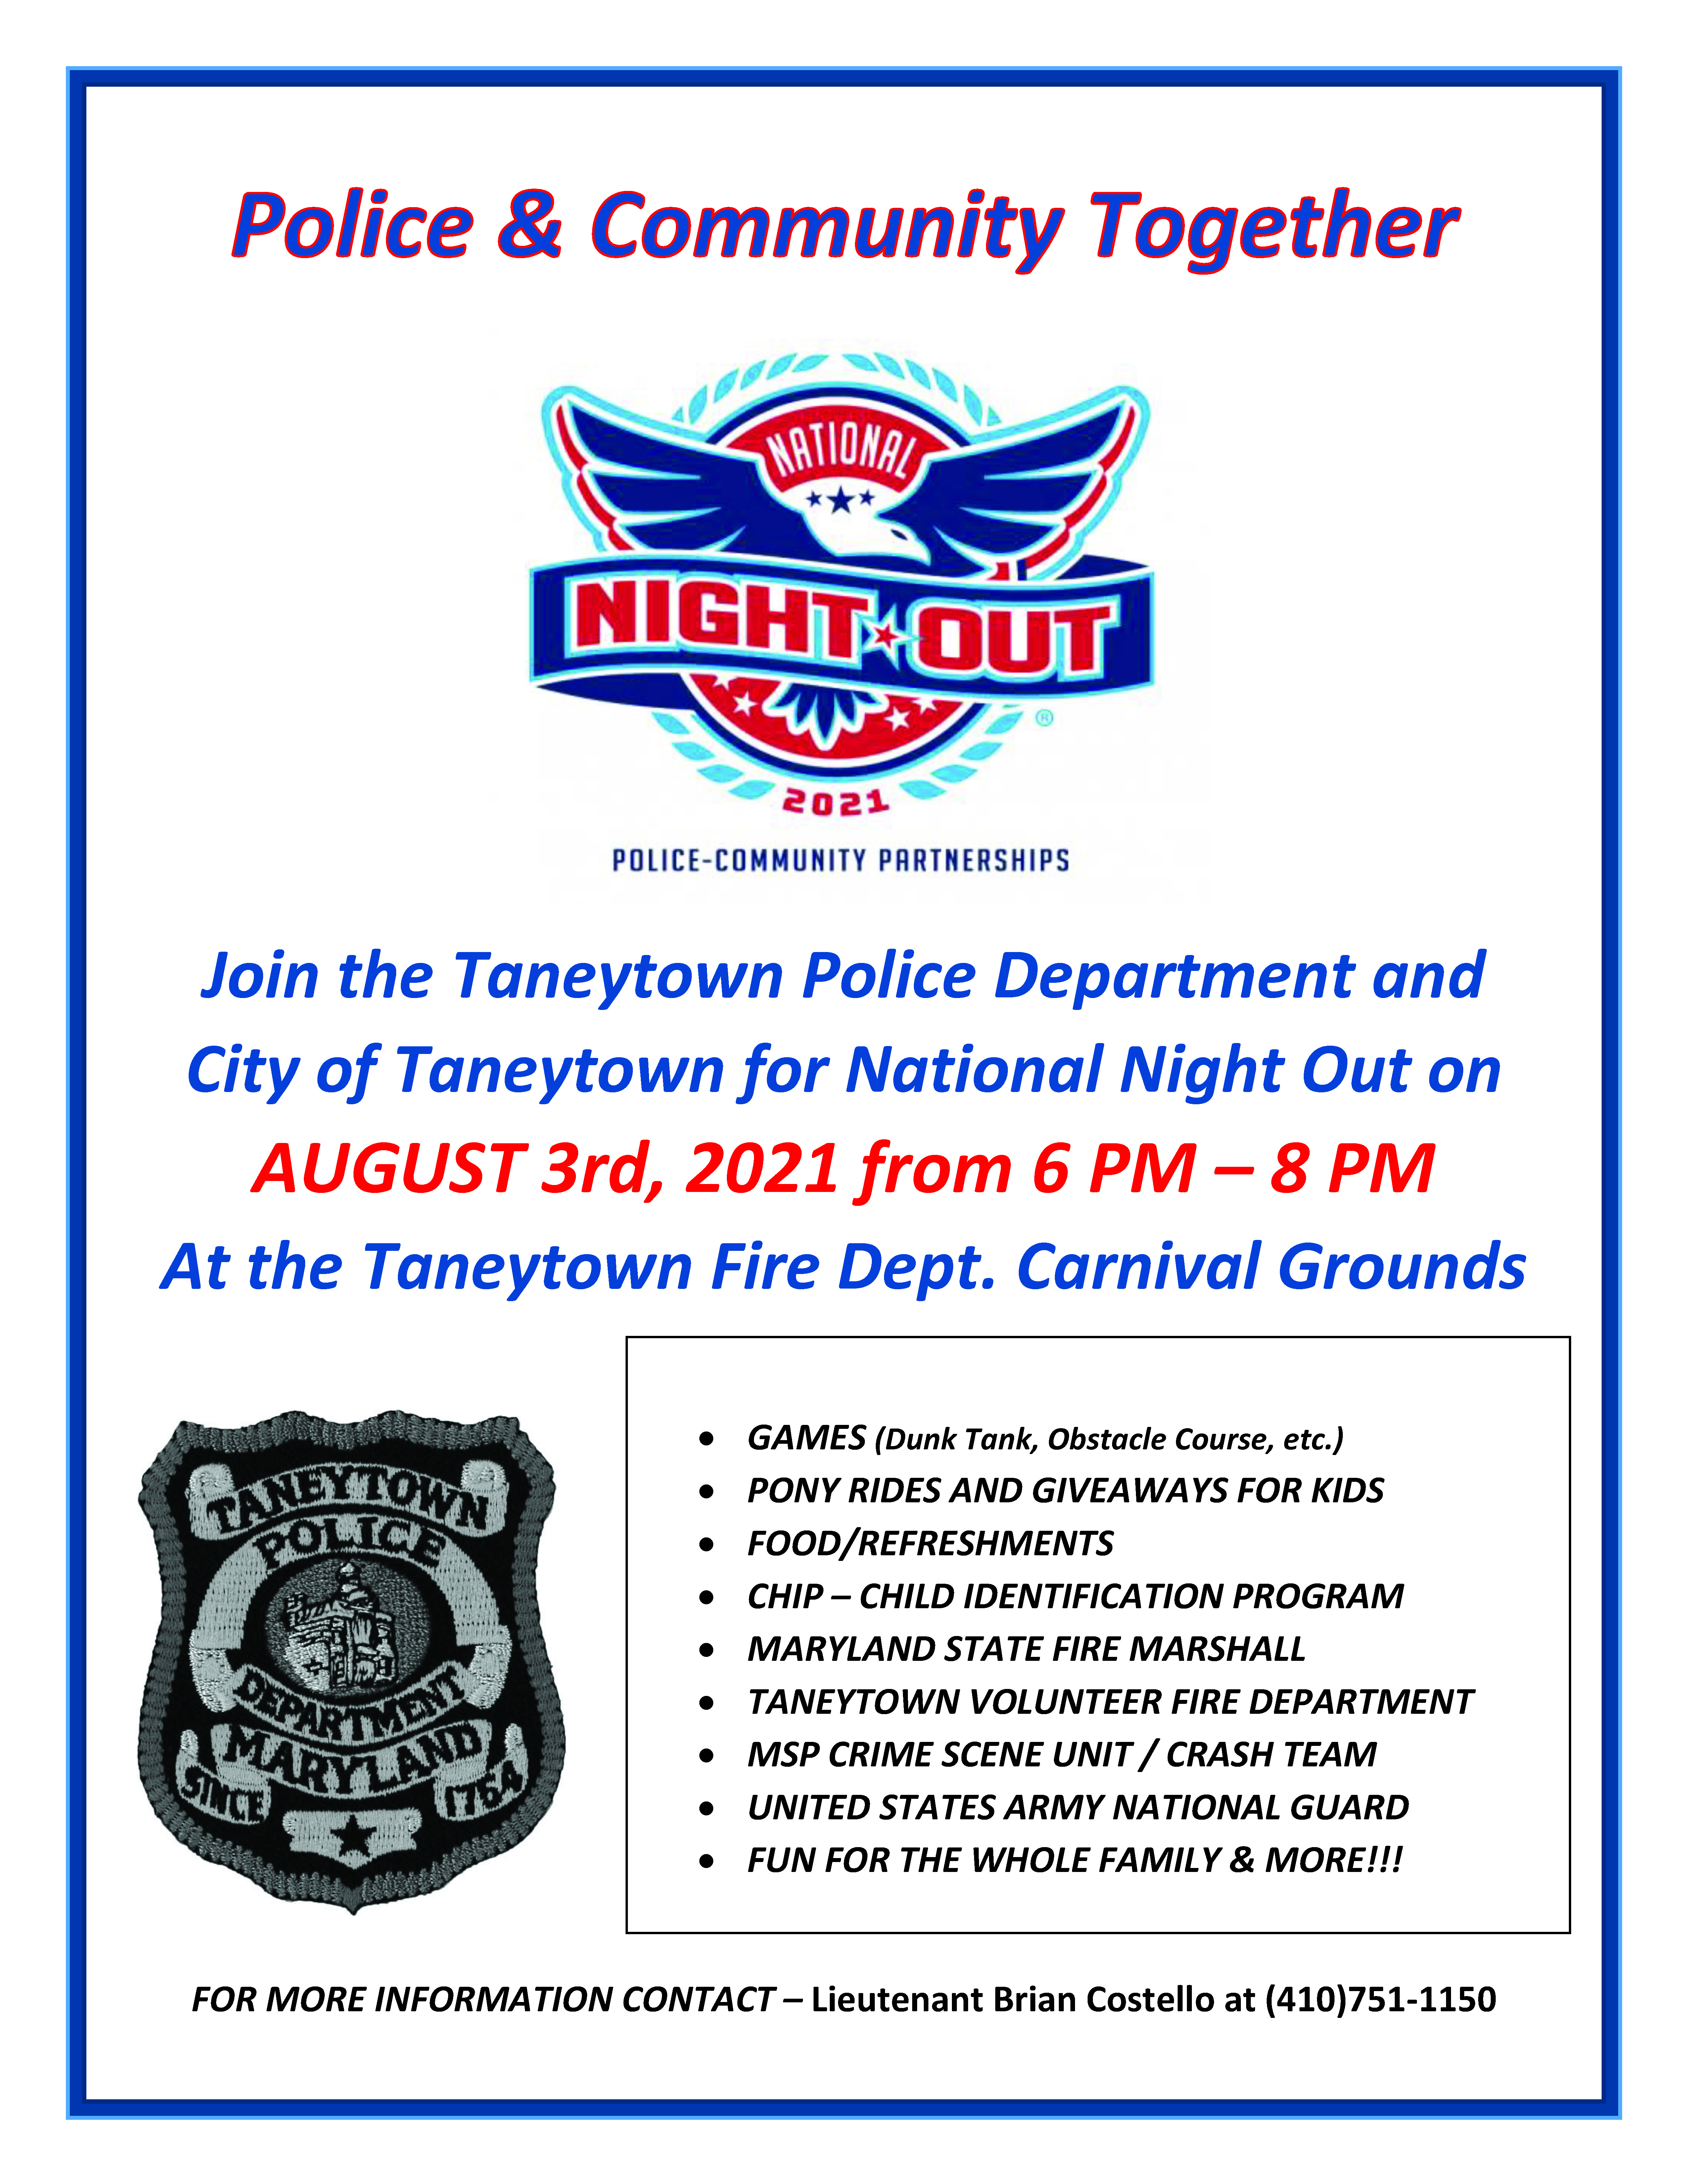 National Night Out 2021 Flyer